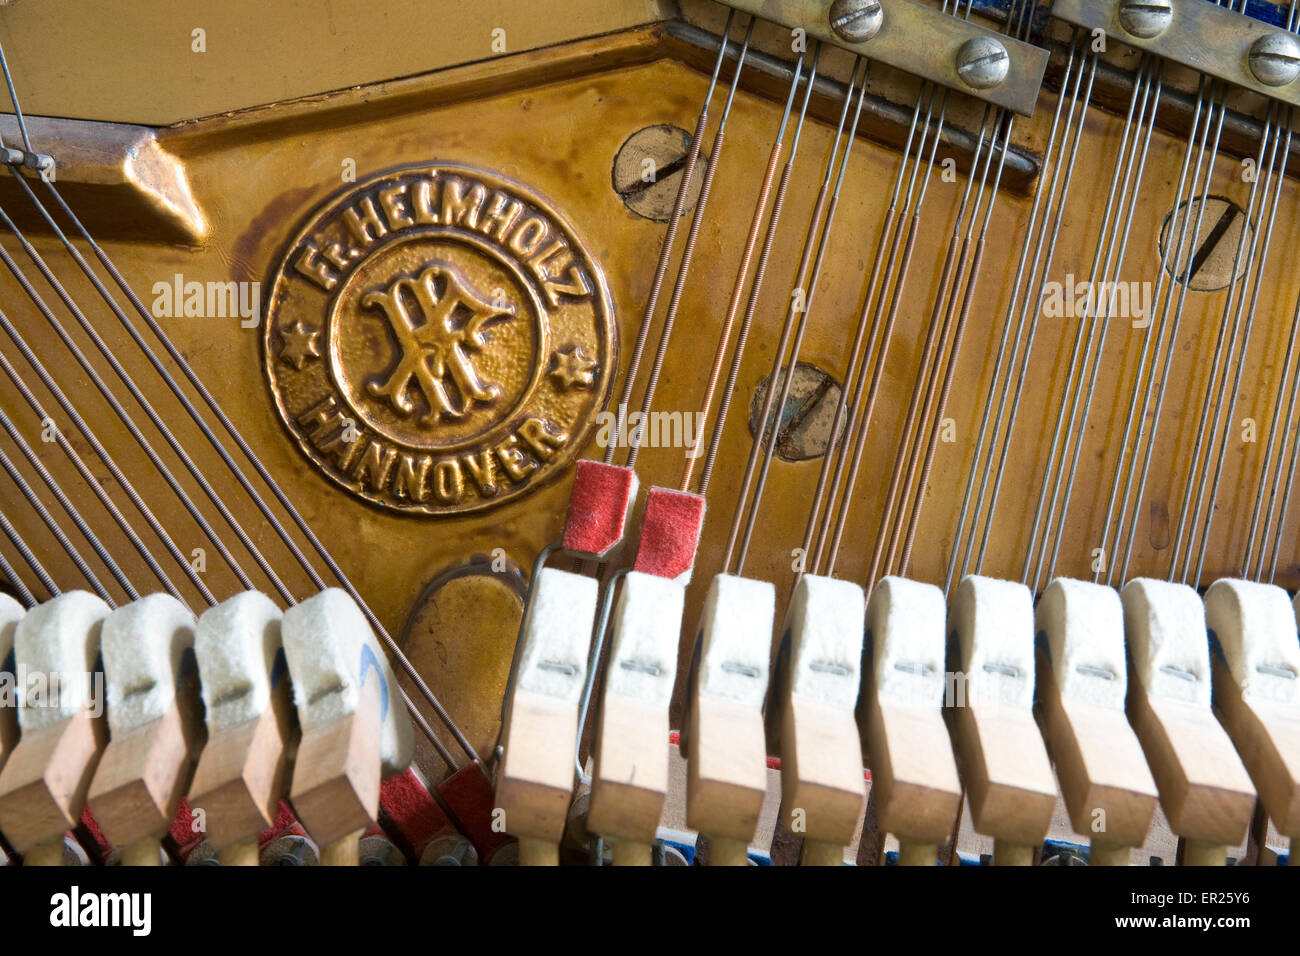 Europe, Germany, opened piano of the manufacturer Helmholz, manufactured in the early 20th century.   Euopa, Deutschland, geoeff Stock Photo